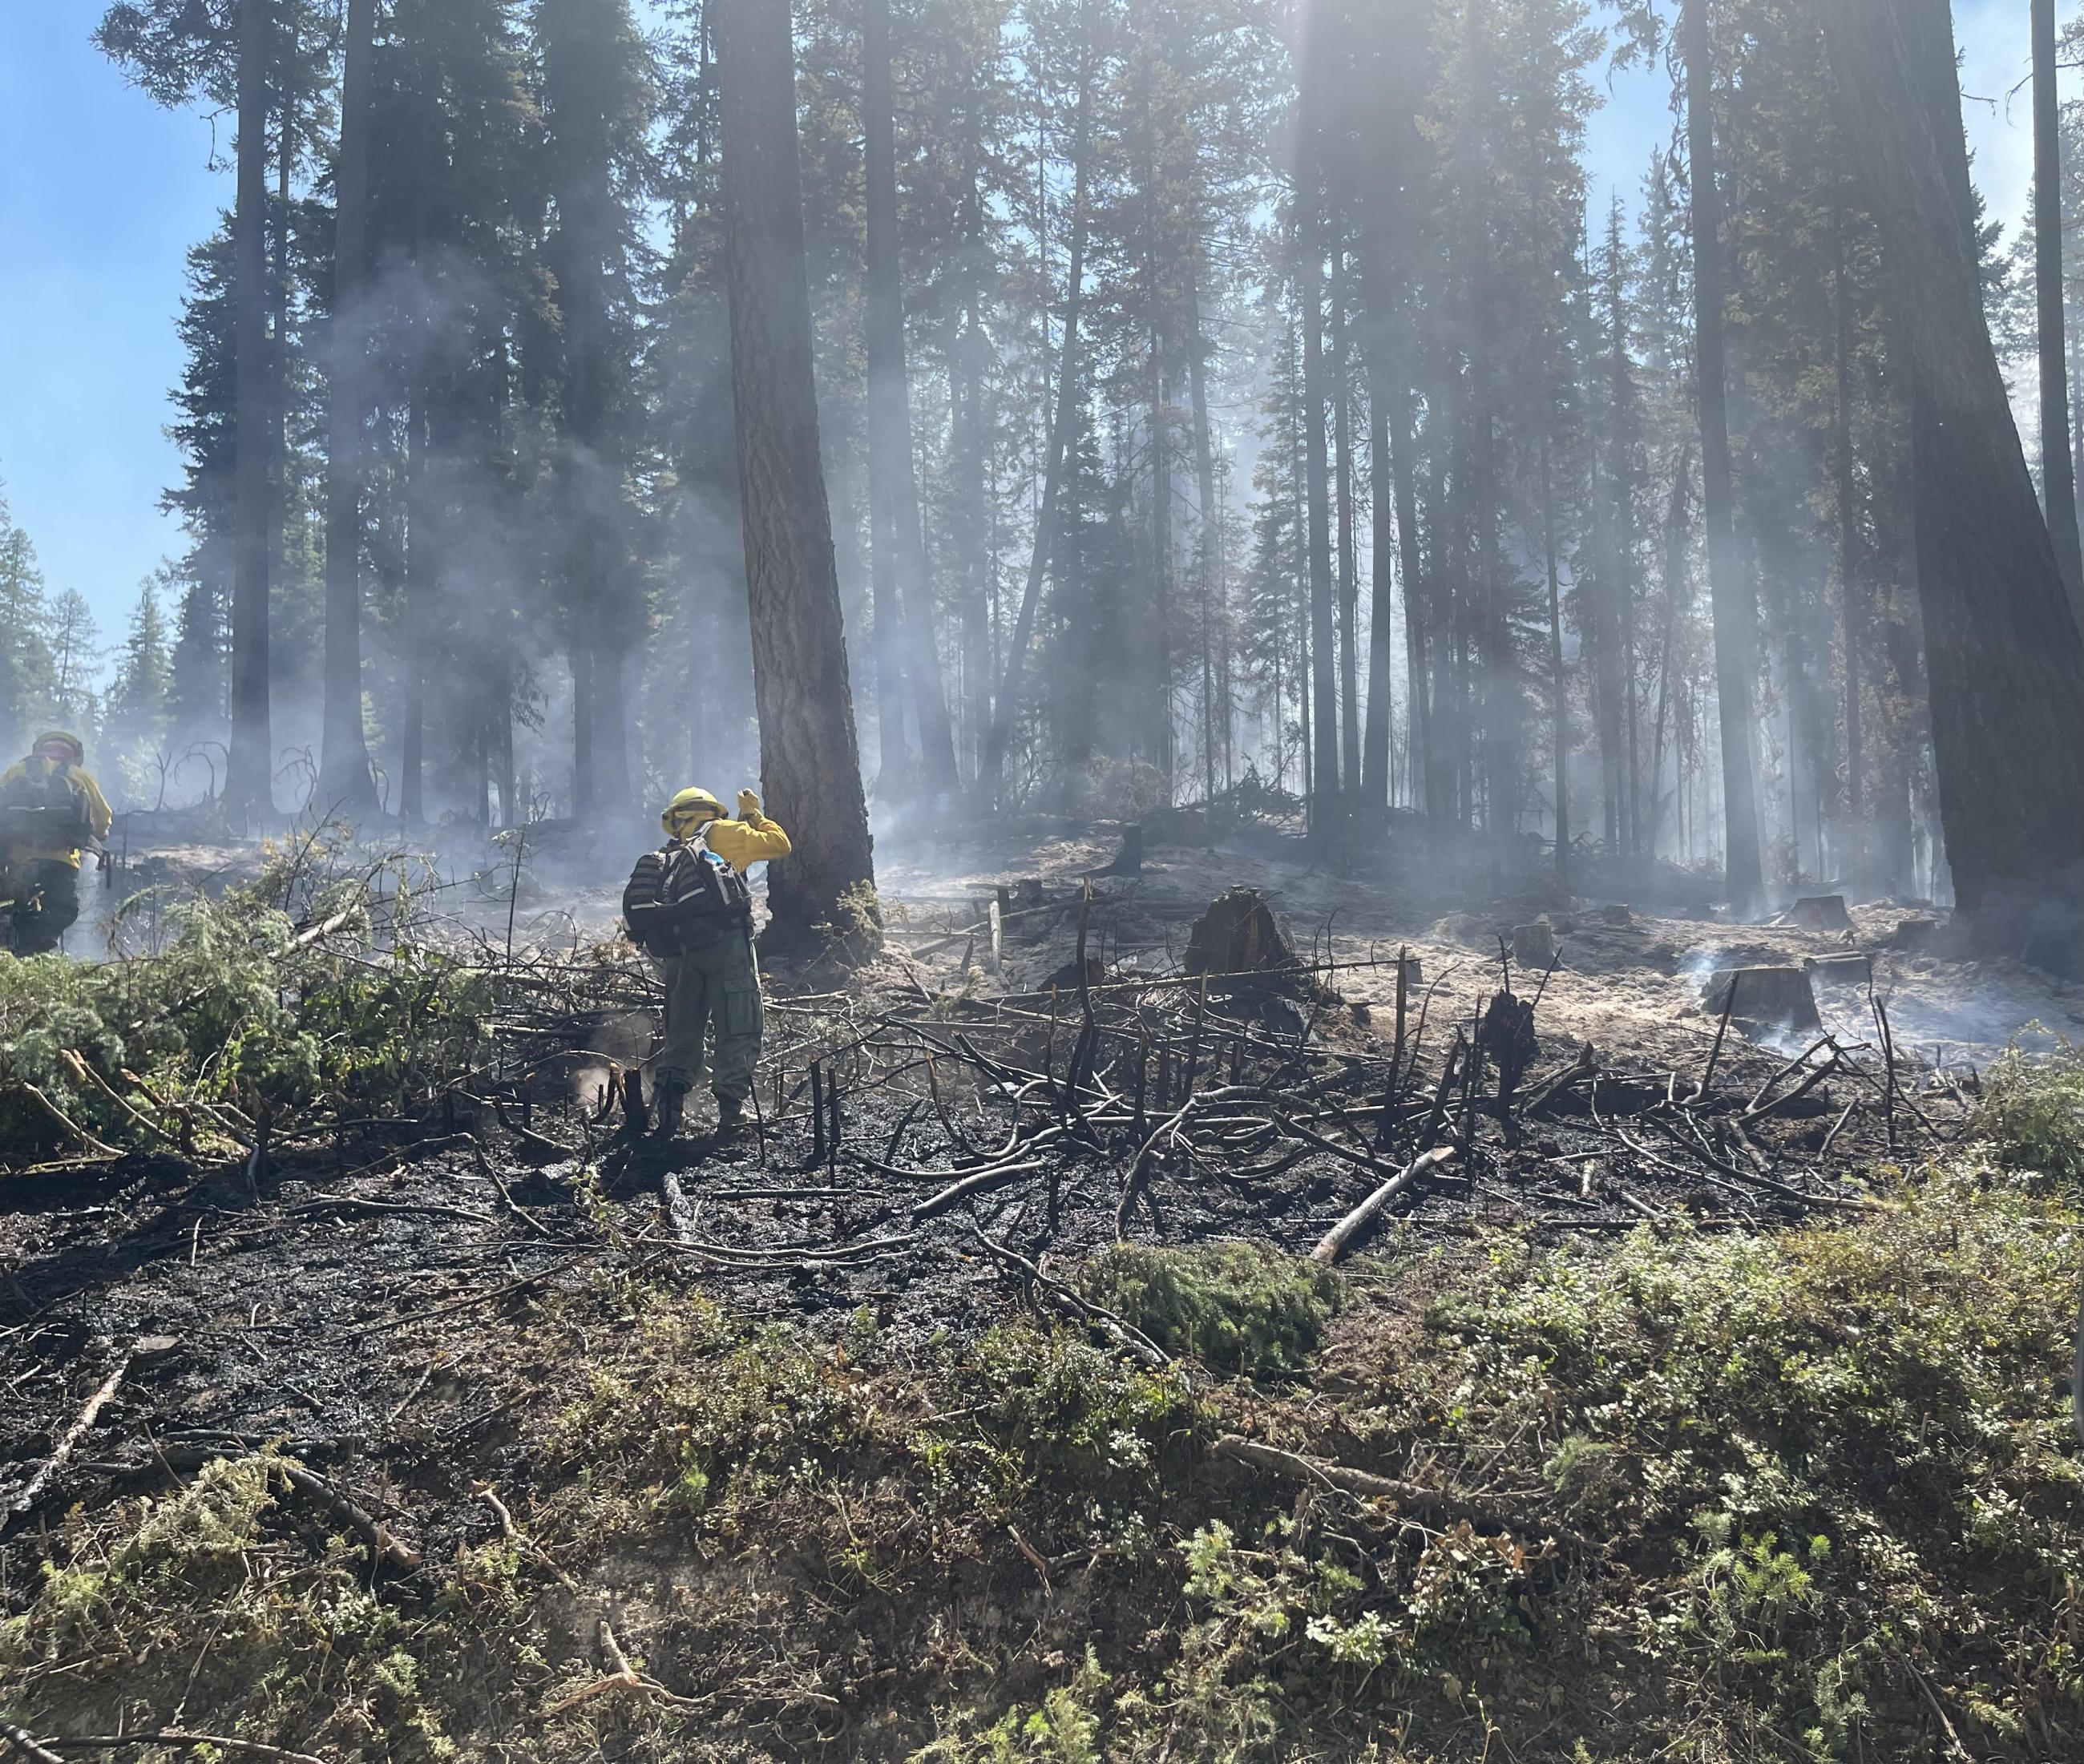 East Fork Fire Lone Firefighter working on hotspots with tool